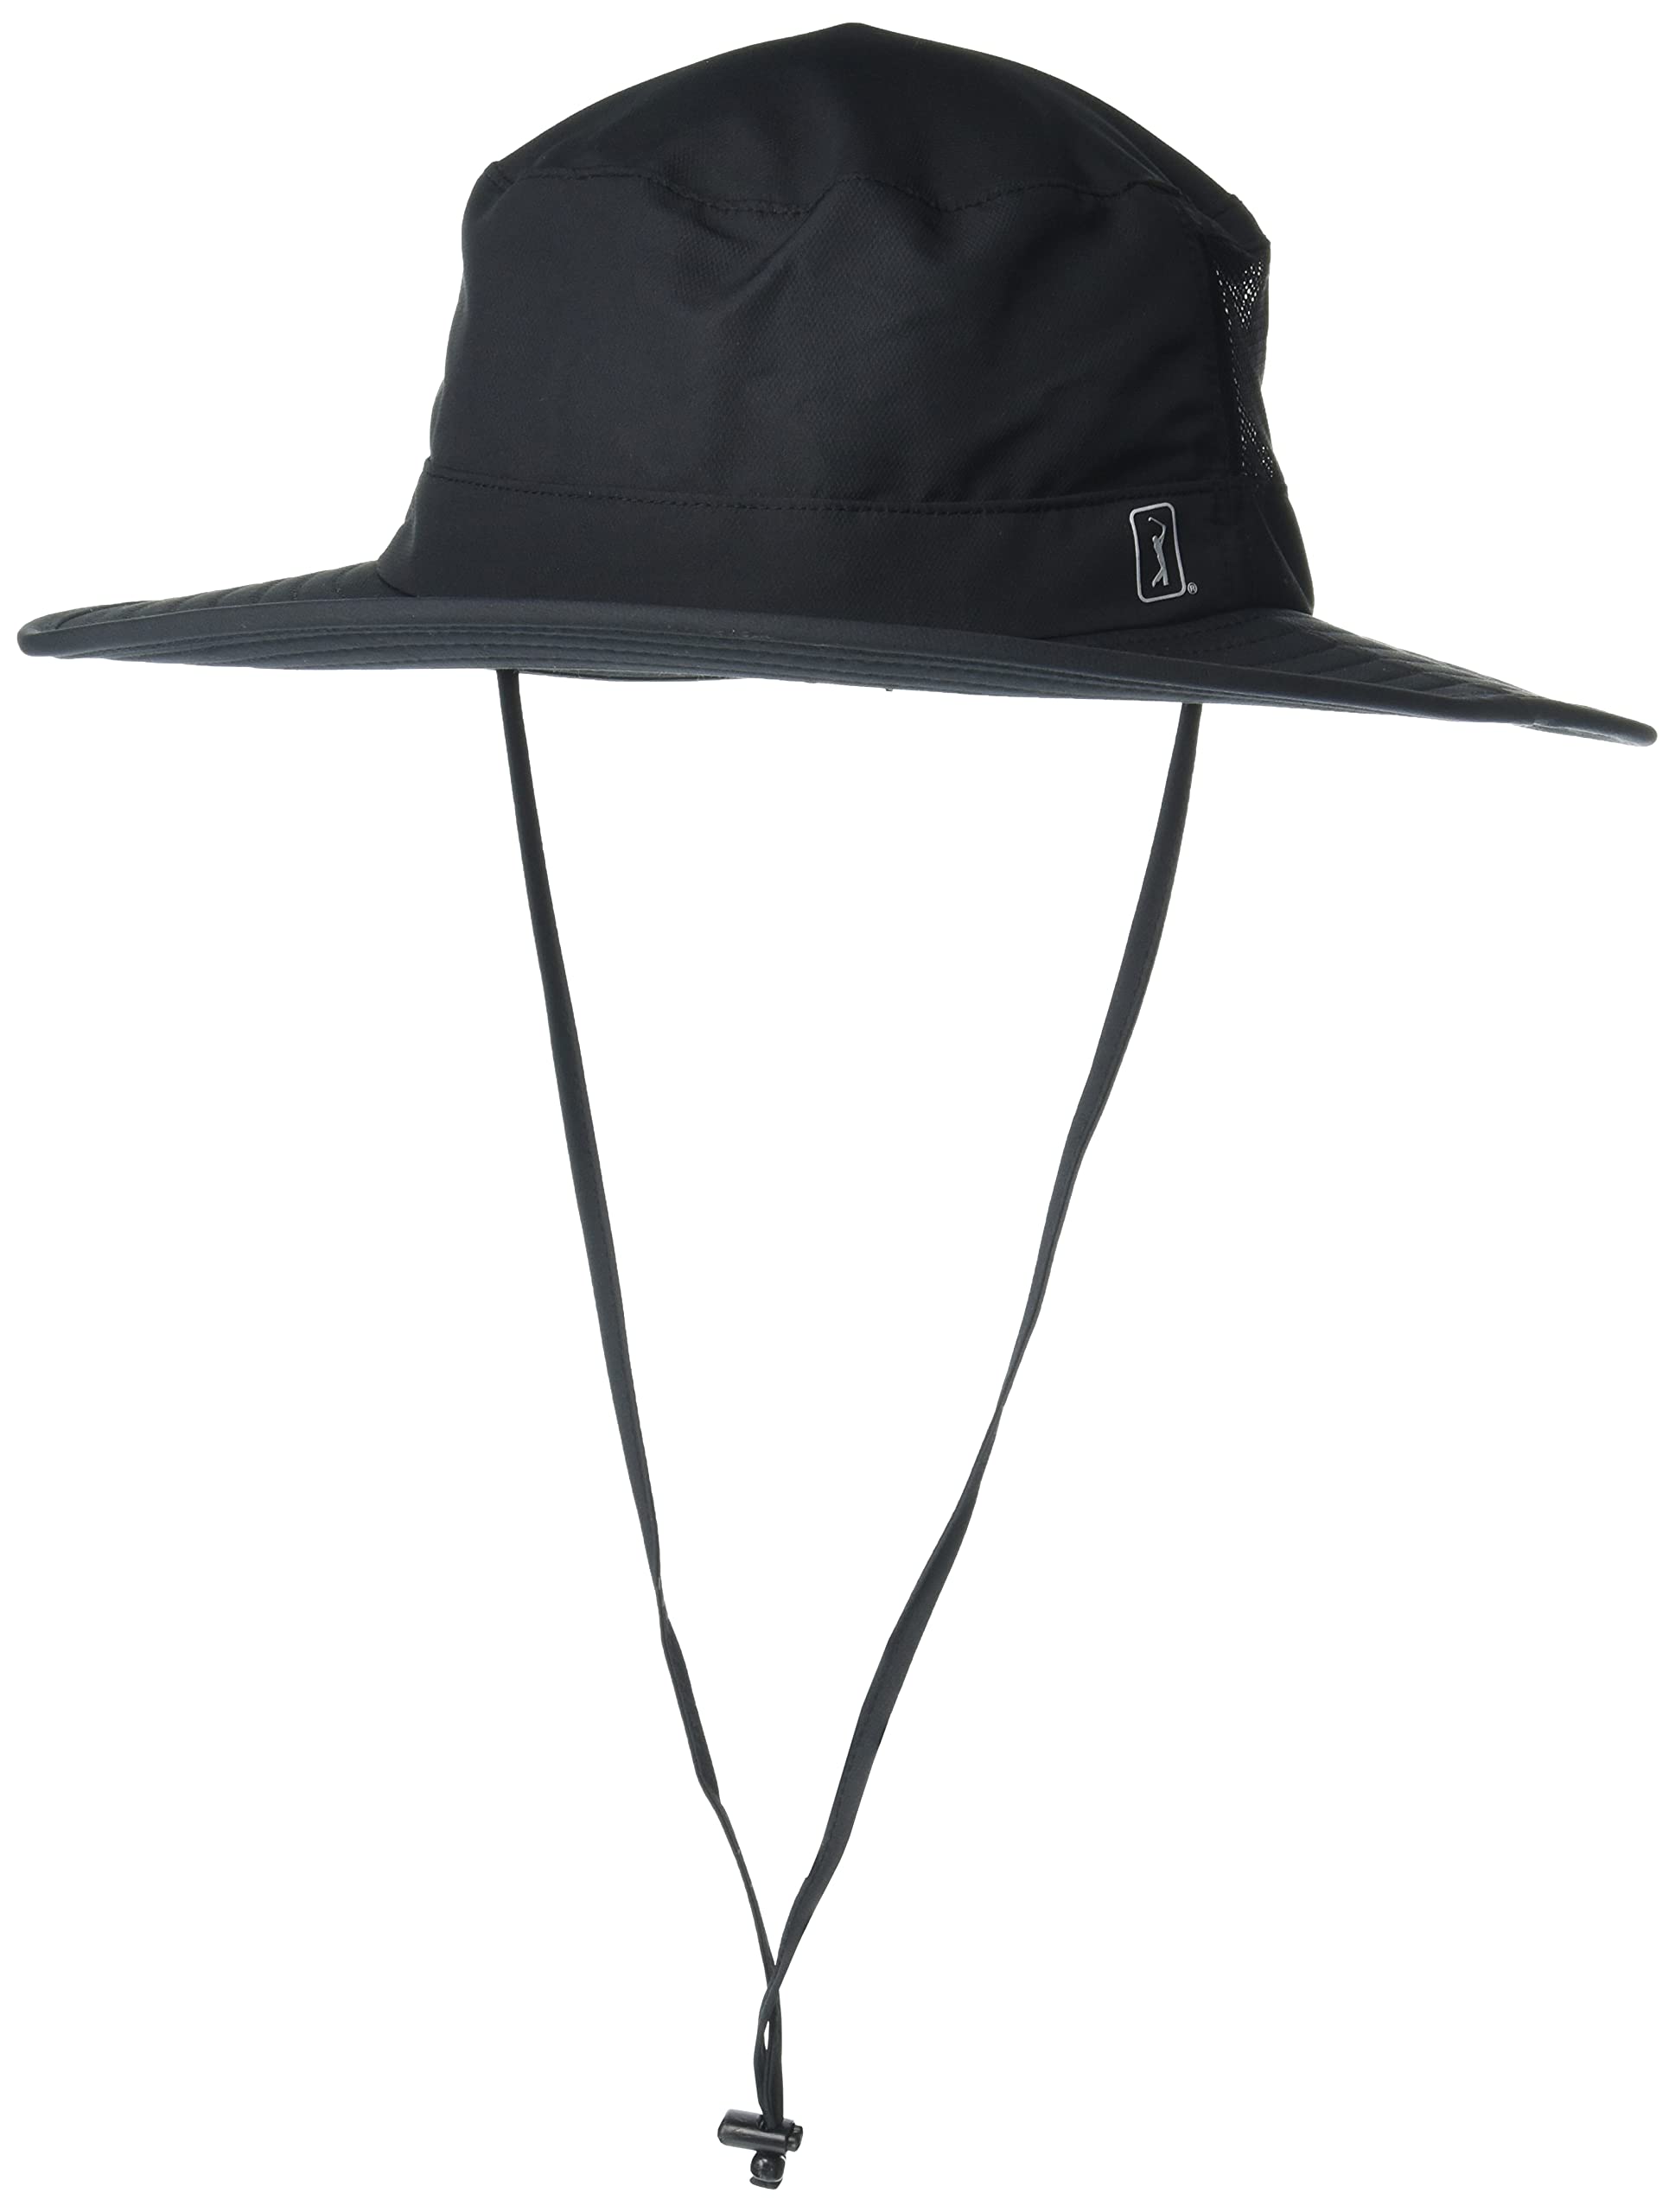 PGA Tour Men's Solar Golf Hat (Caviar) $10 + Free Store Pick Up at Saks Off 5th or Free S/H on $99+